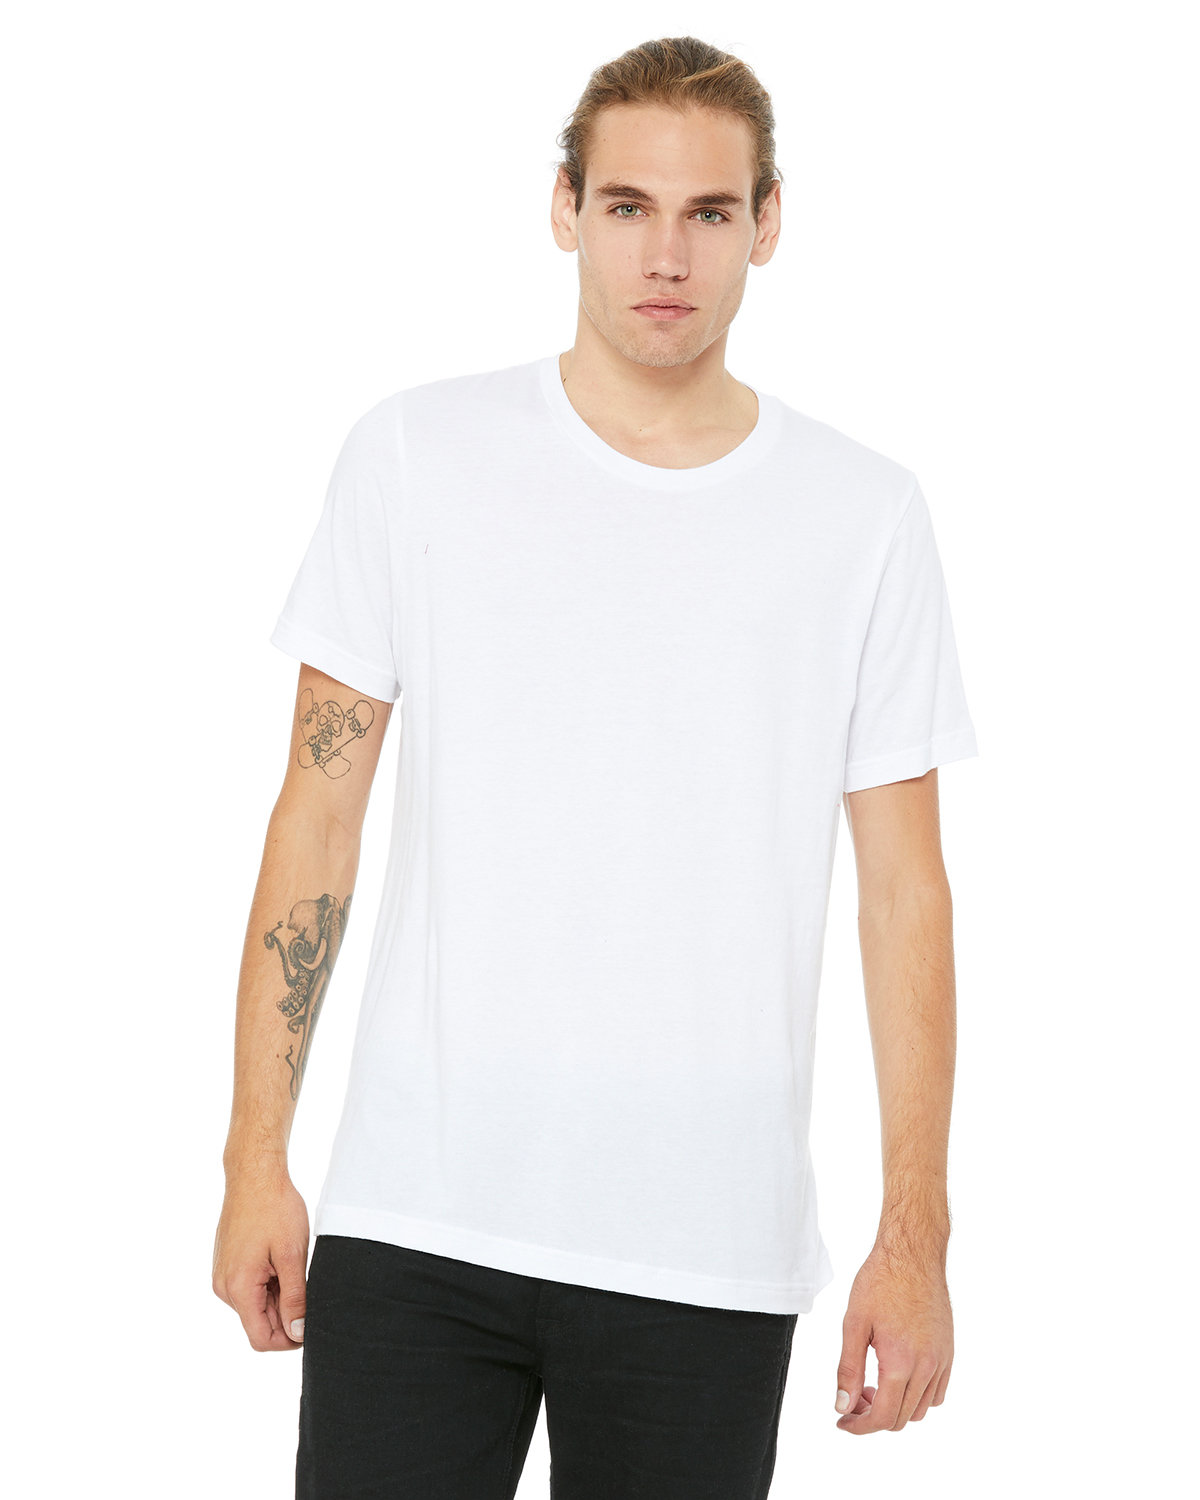 BELLA + CANVAS - Unisex Jersey T-Shirt Vintage White – More Than Just Caps  Clubhouse